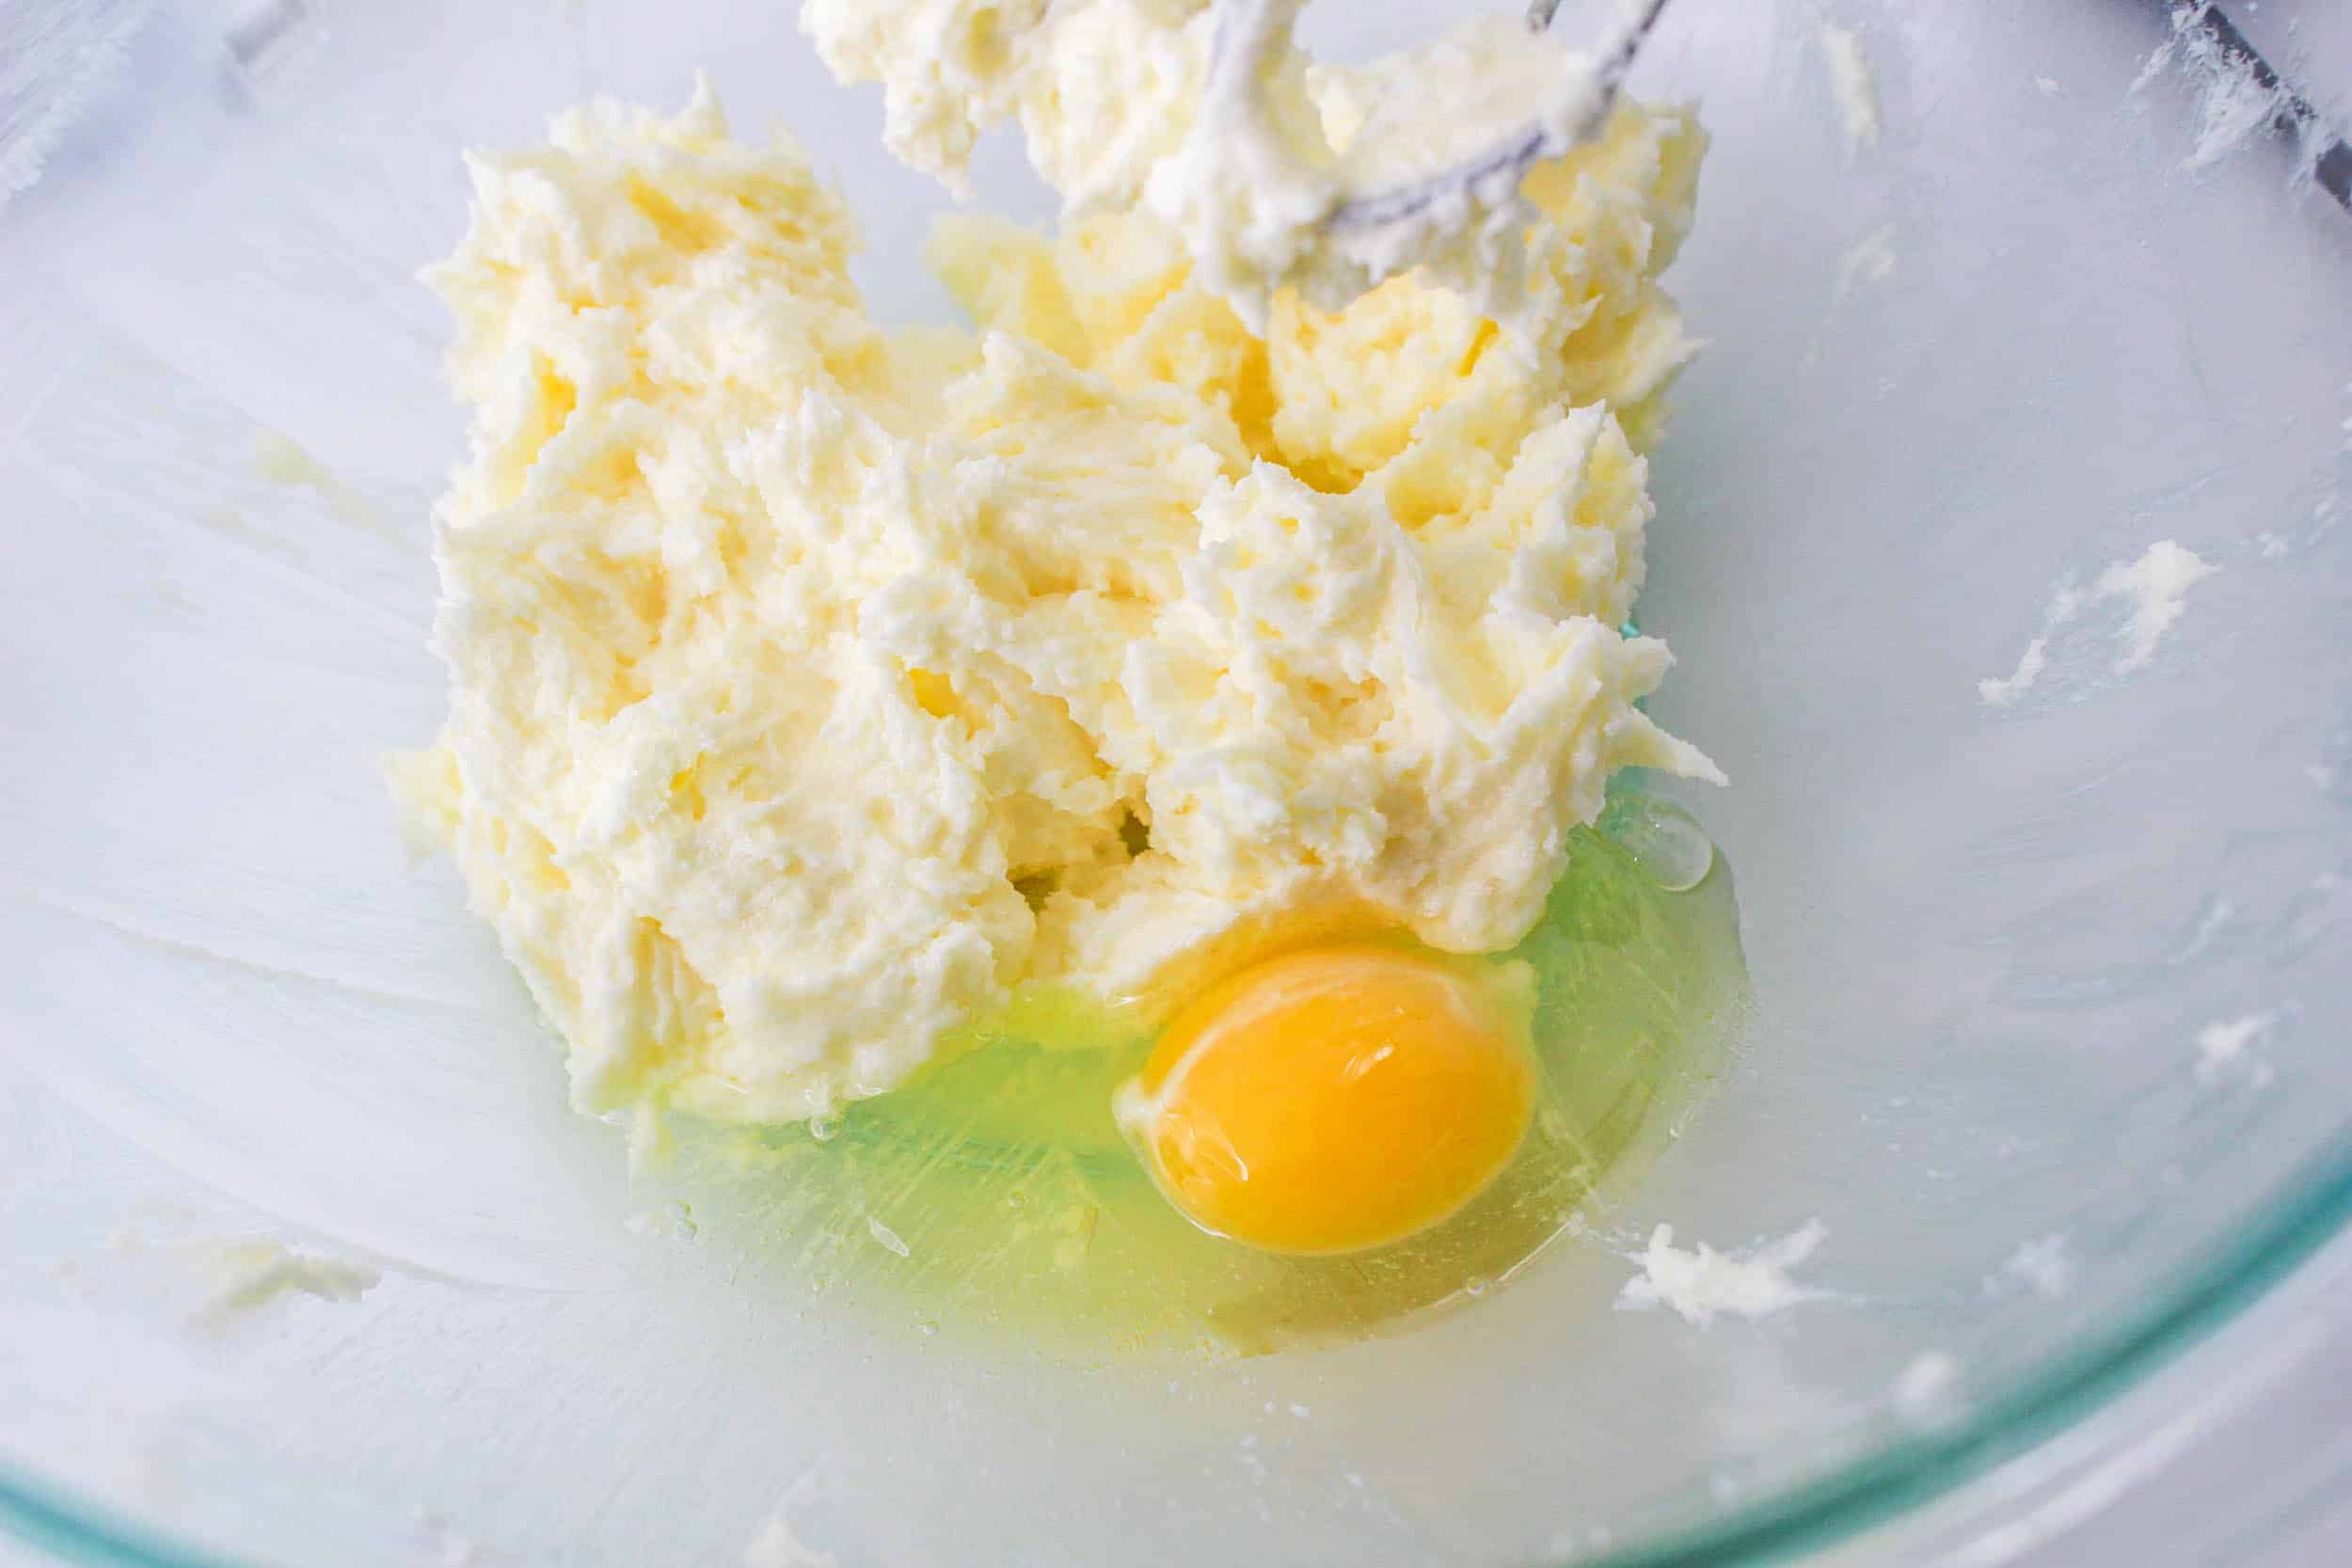 egg being added butter and sugar in a glass bowl.